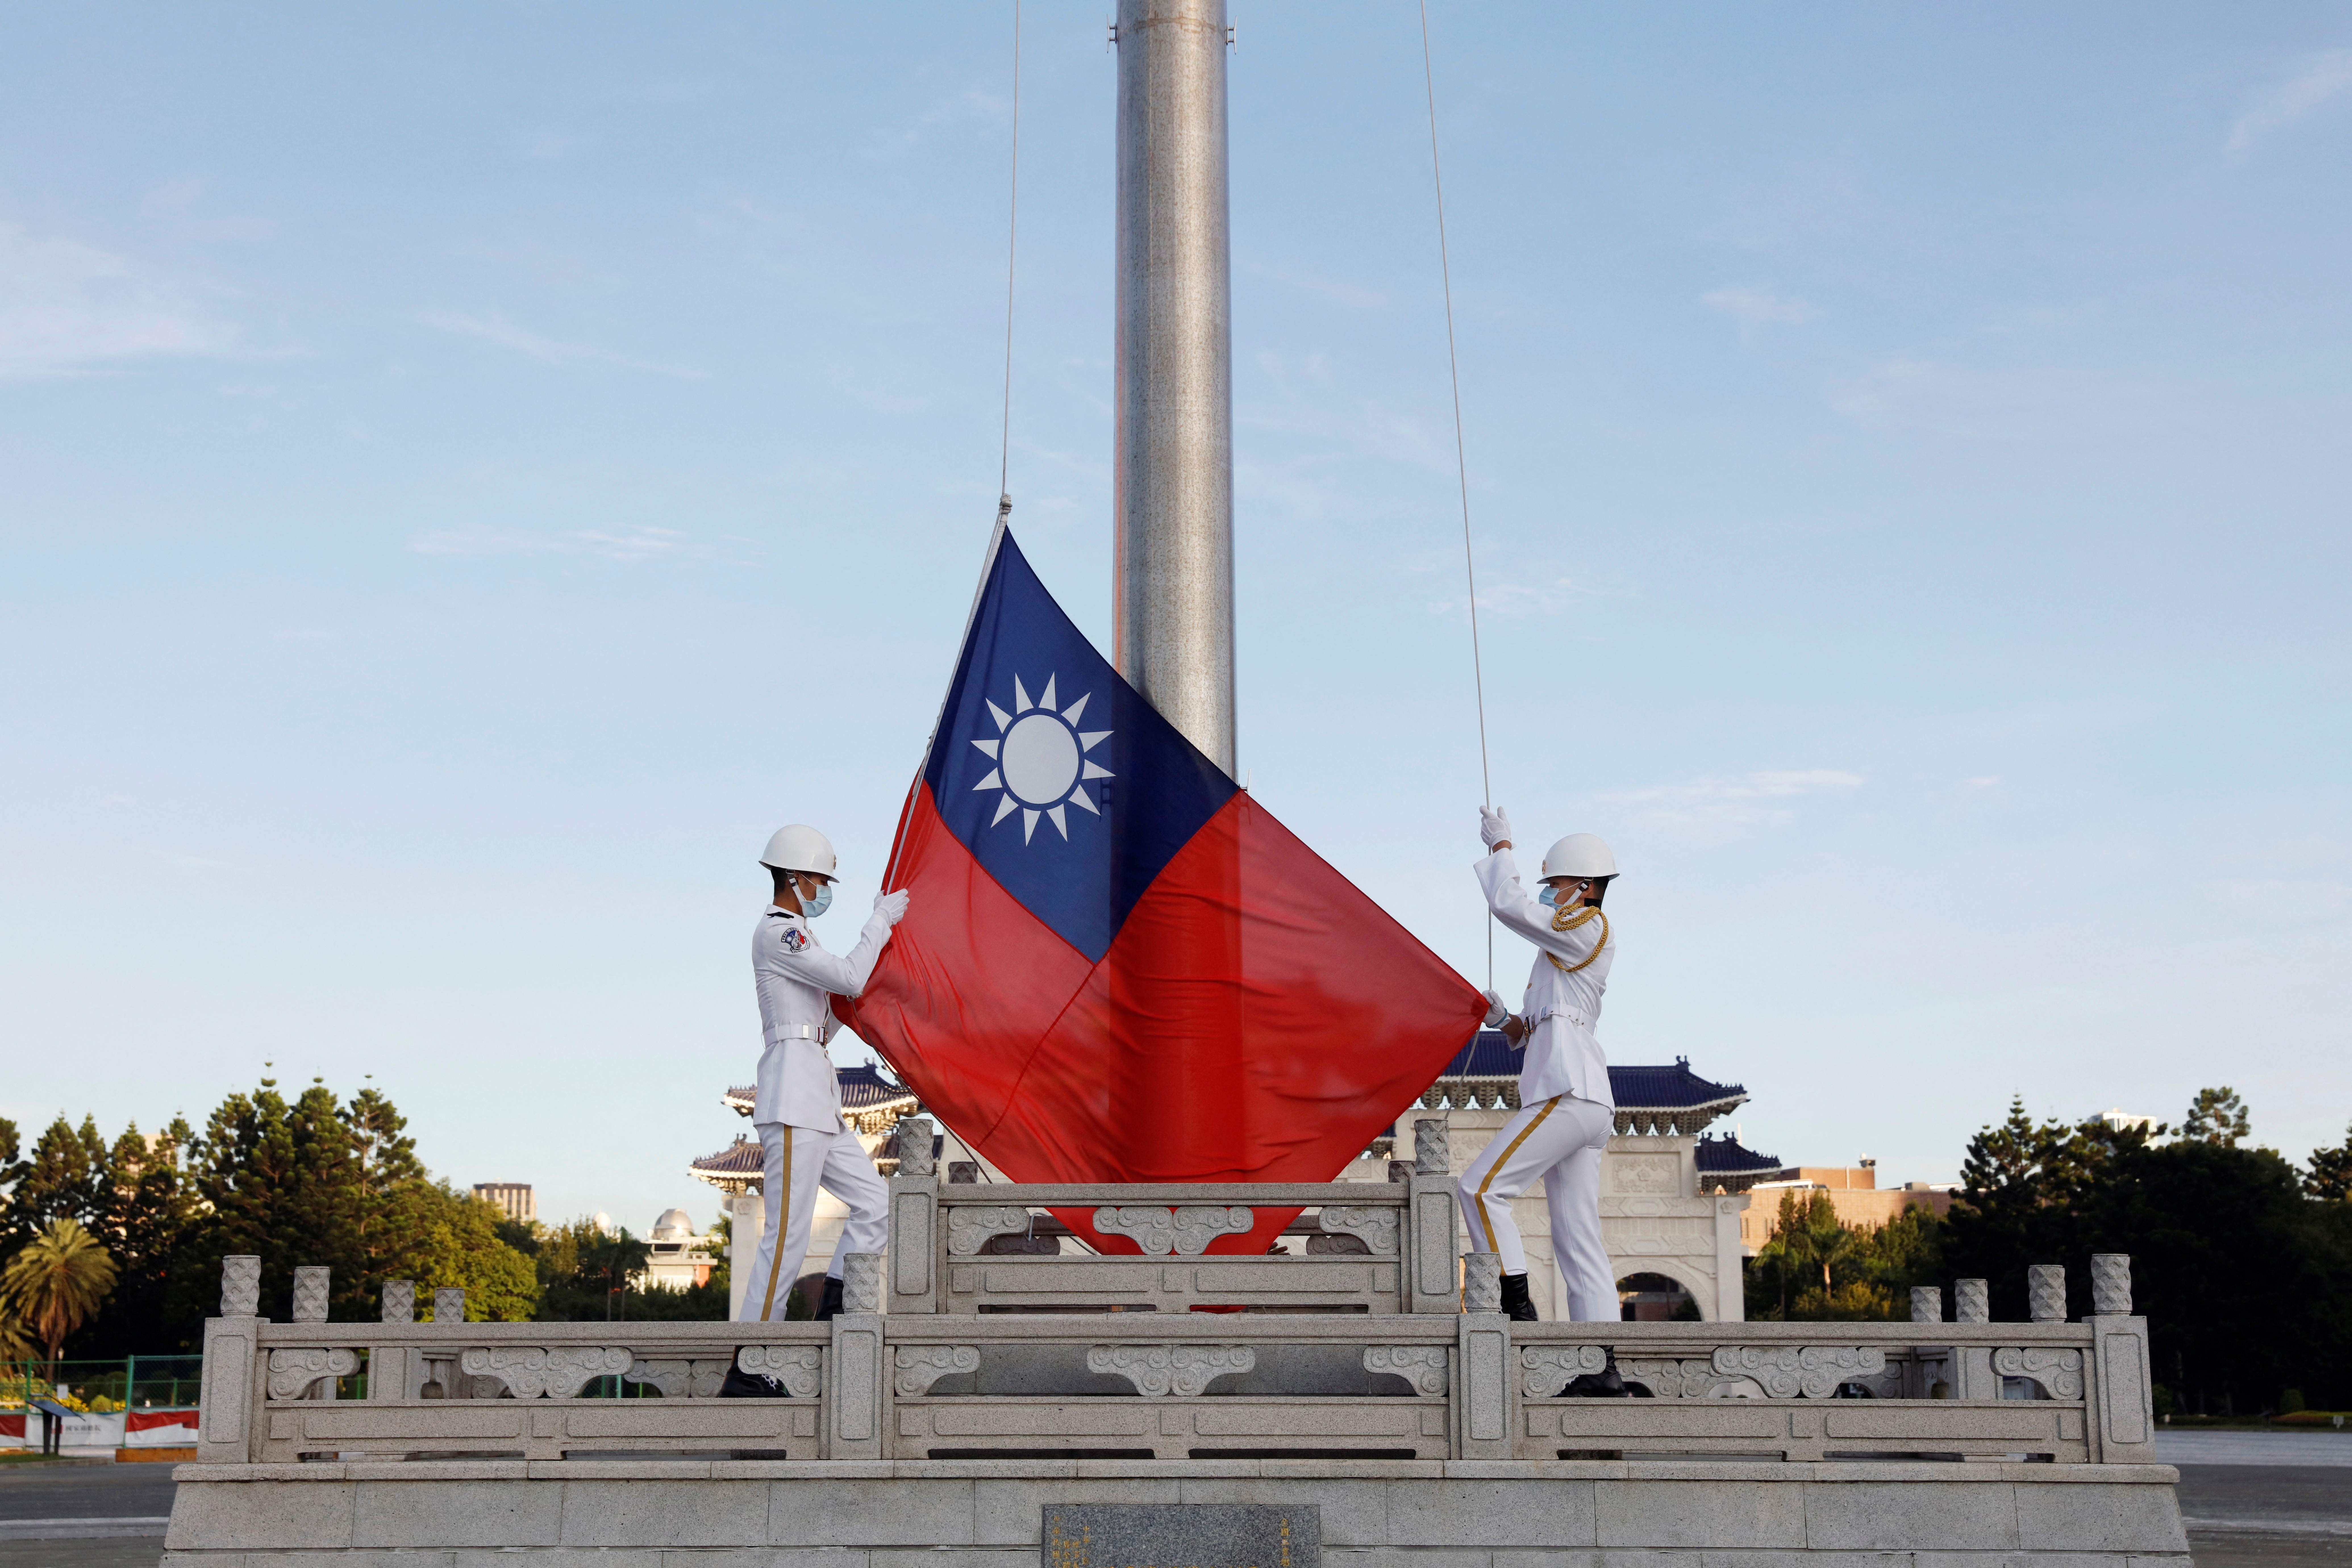 Taiwan activated its land-based missile systems as China continues its blockade of the island